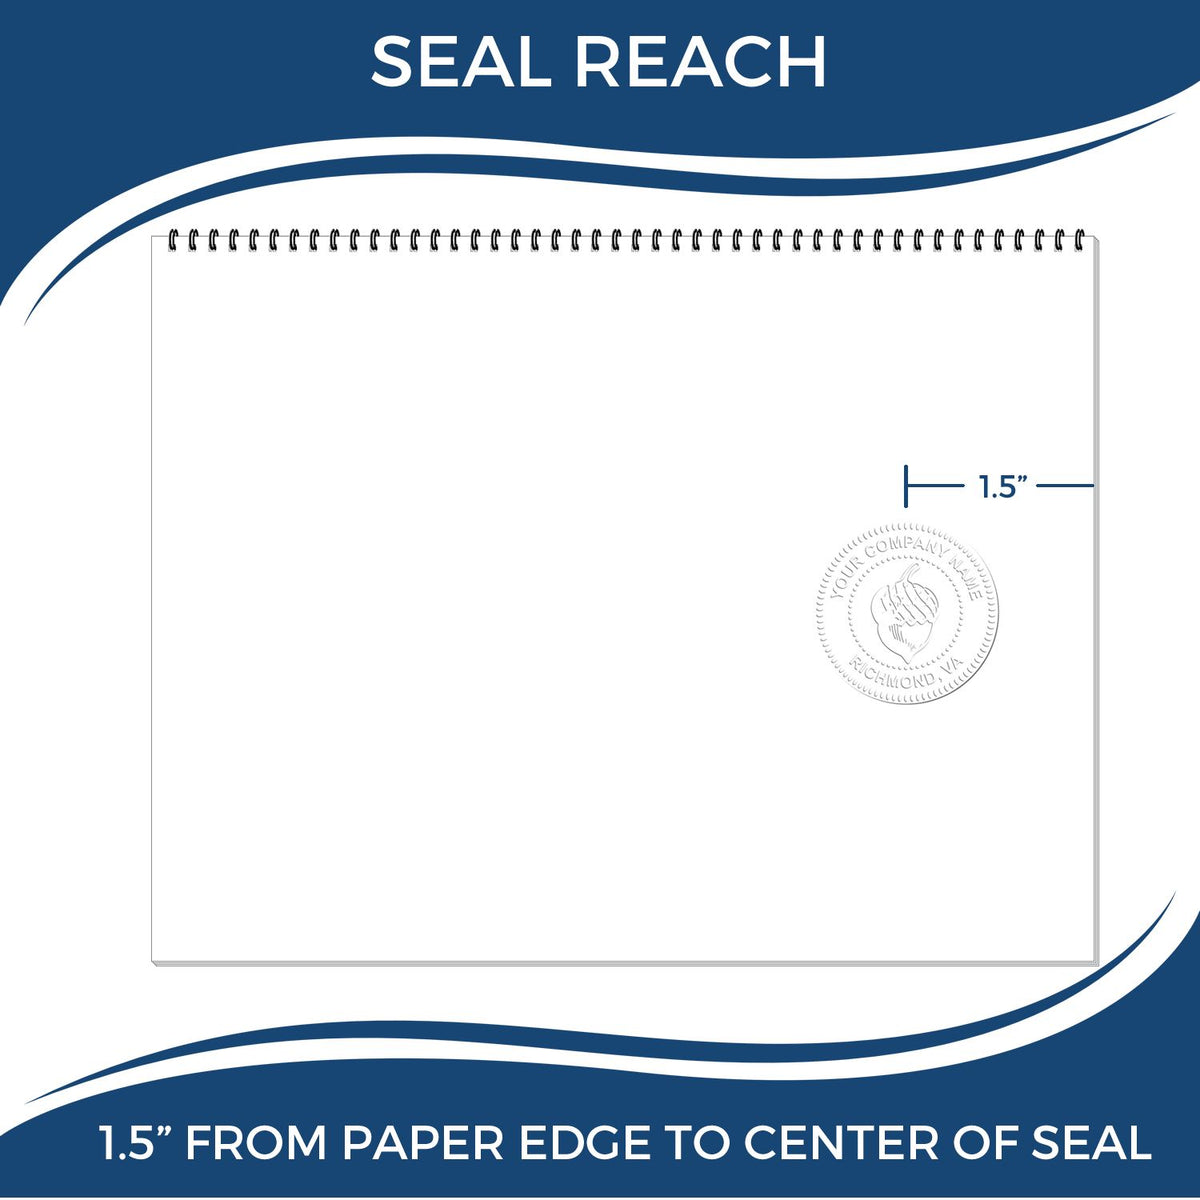 An infographic showing the seal reach which is represented by a ruler and a miniature seal image of the Soft Pocket Pennsylvania Landscape Architect Embosser